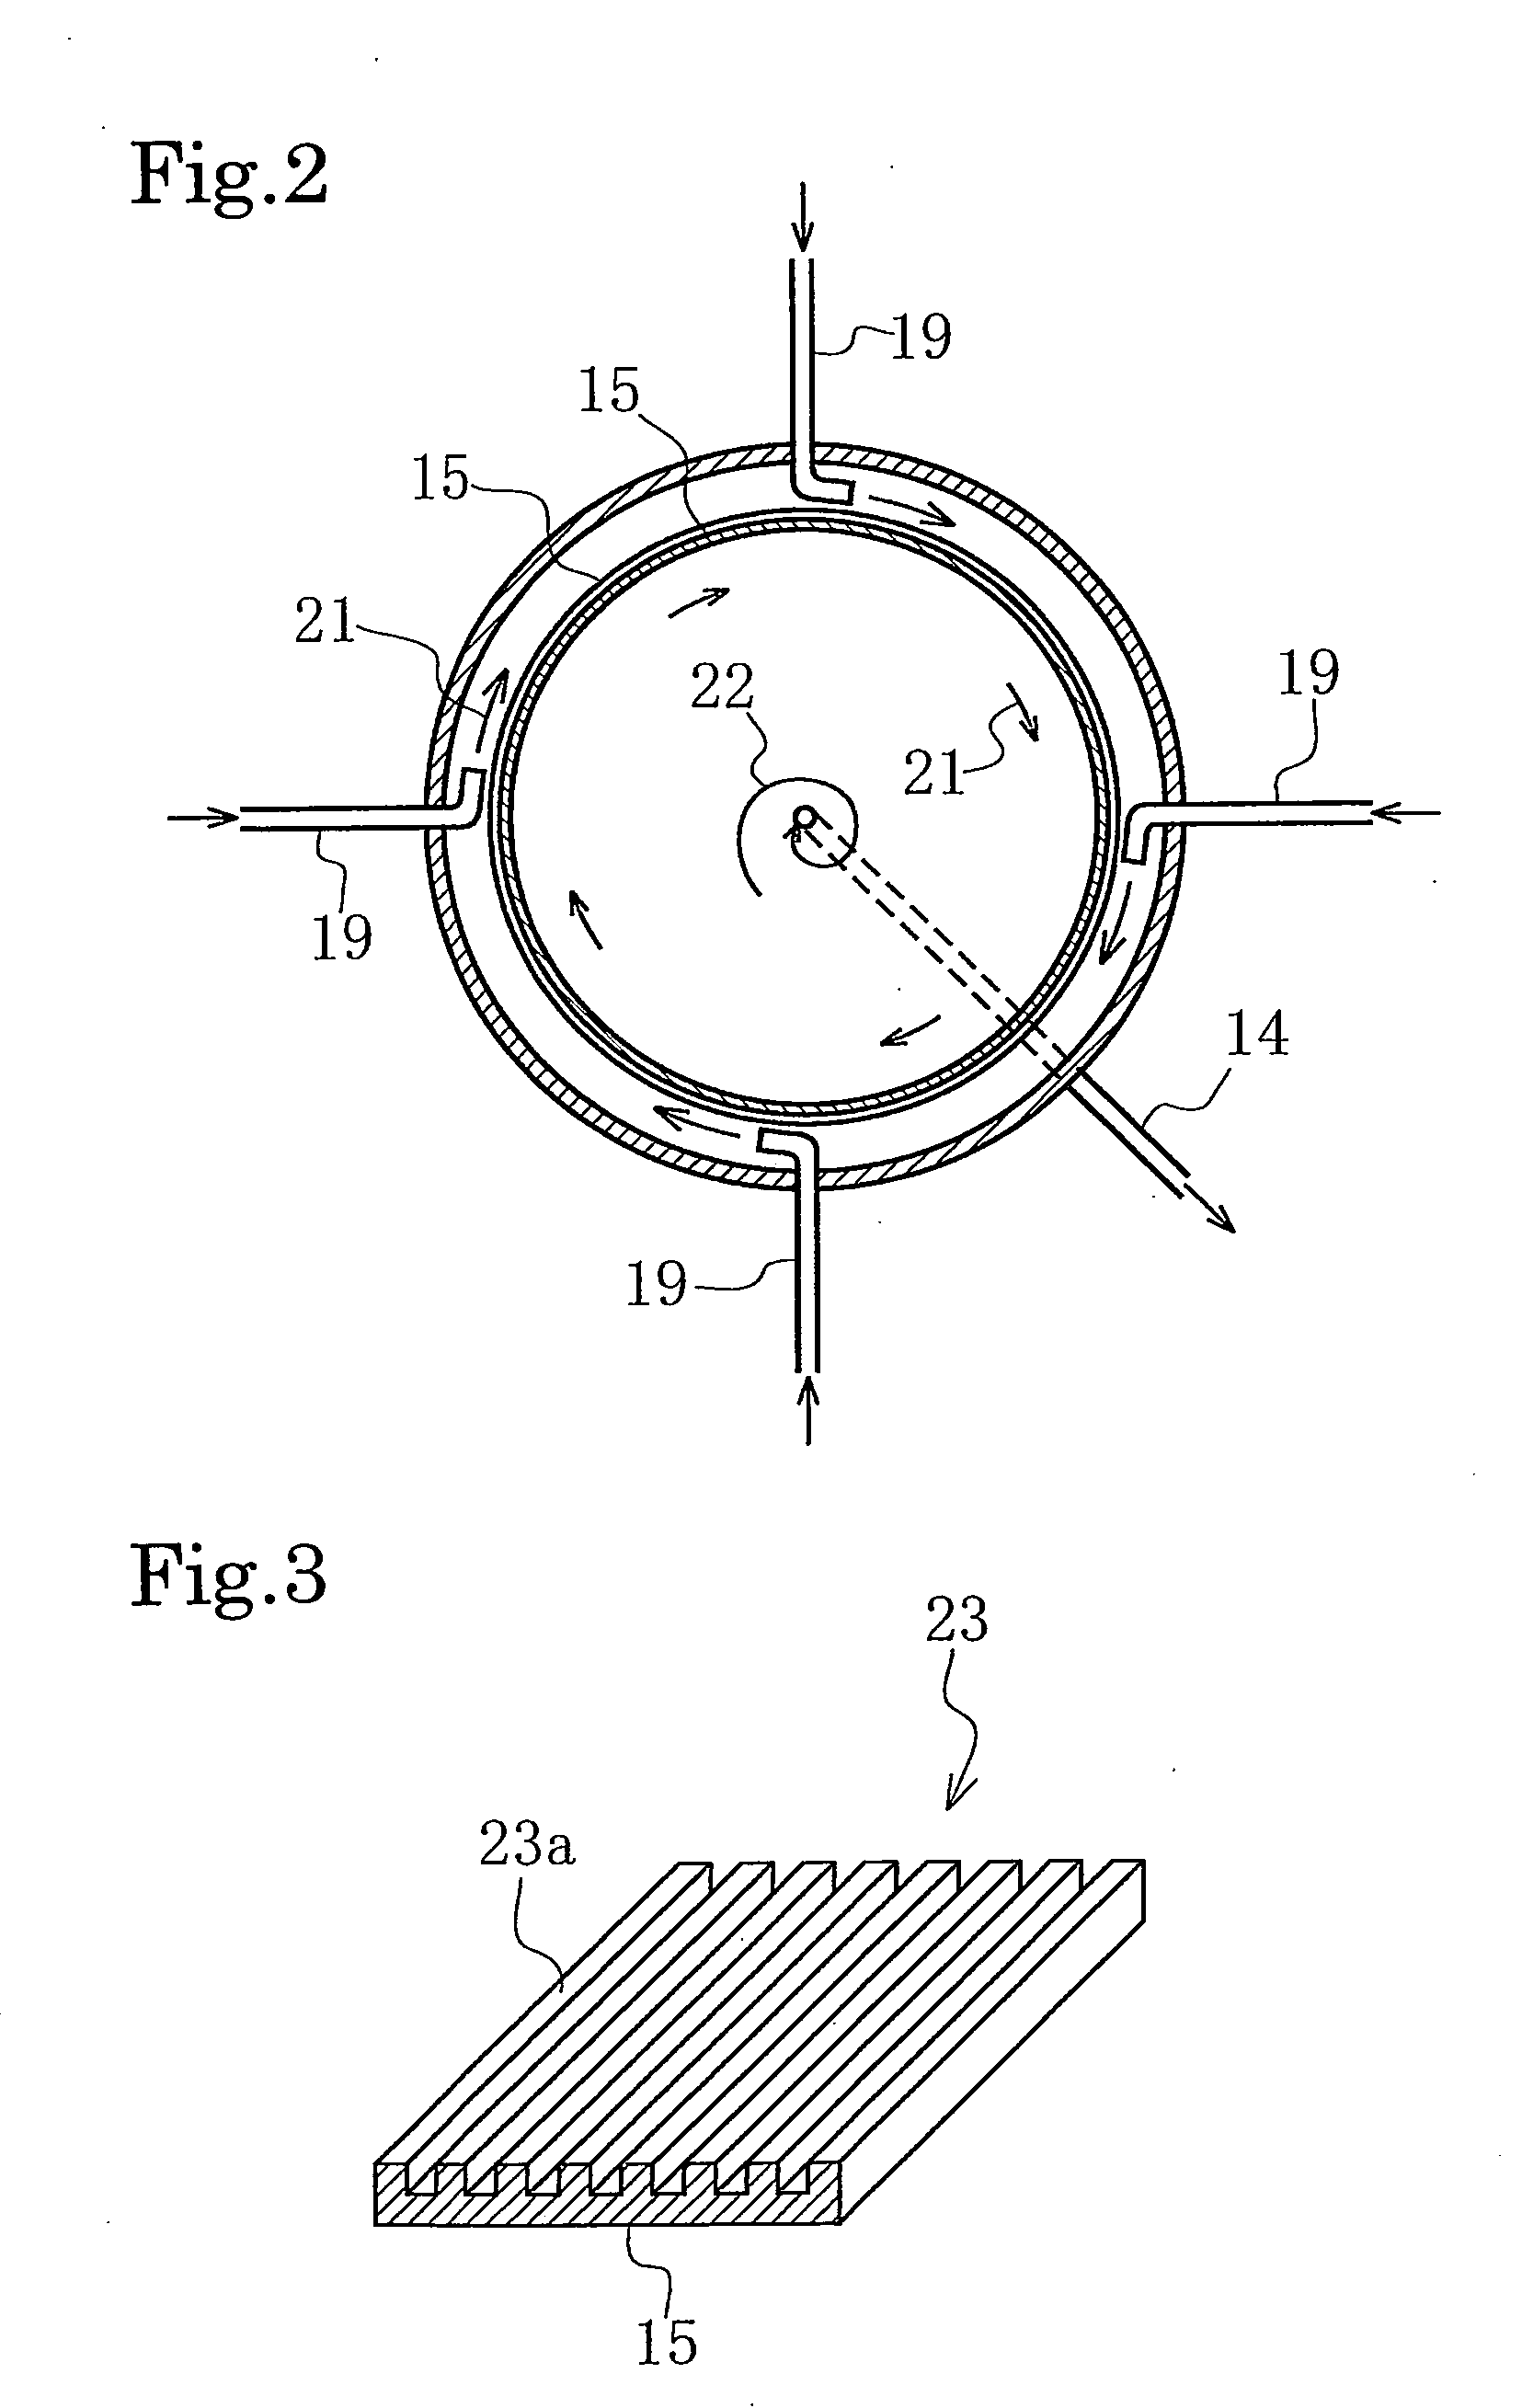 Apparatus and method for gasifying gas hydrate pellet